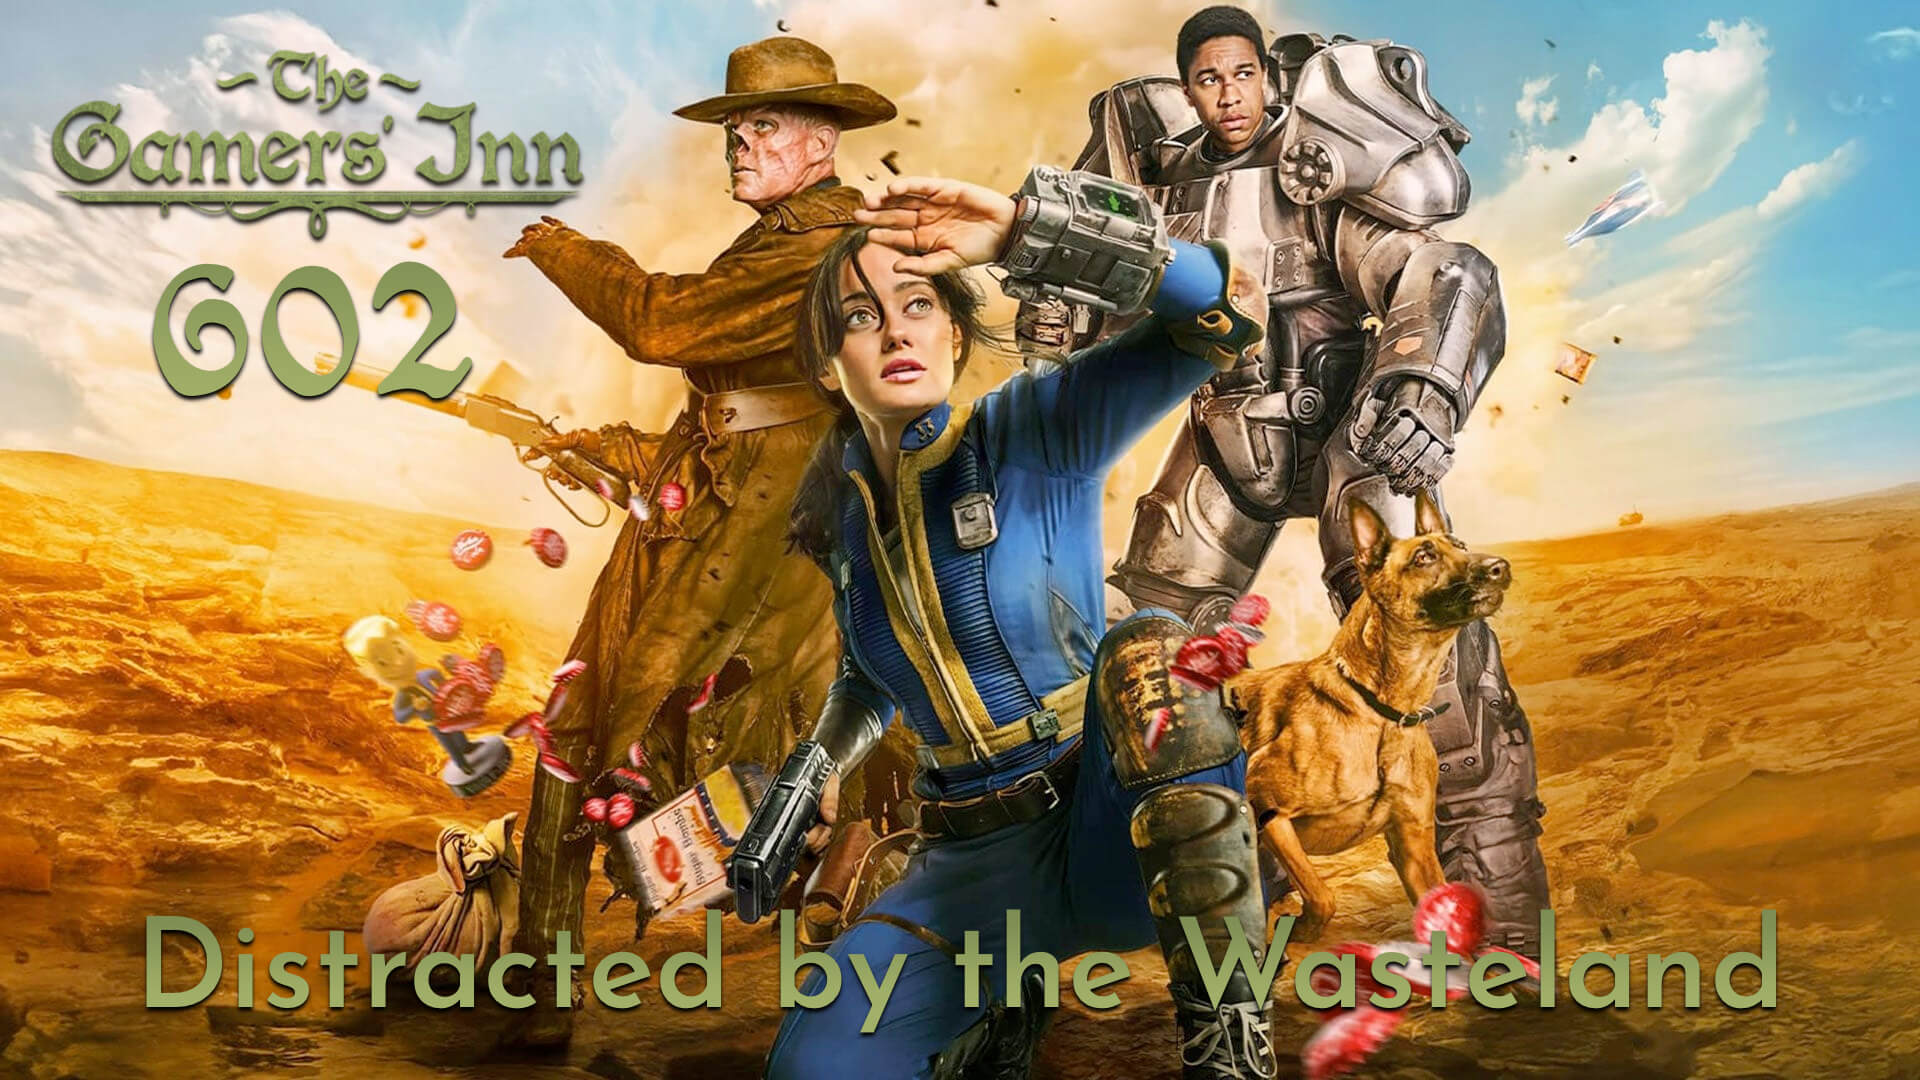 TGI 602 – Distracted by the Wasteland